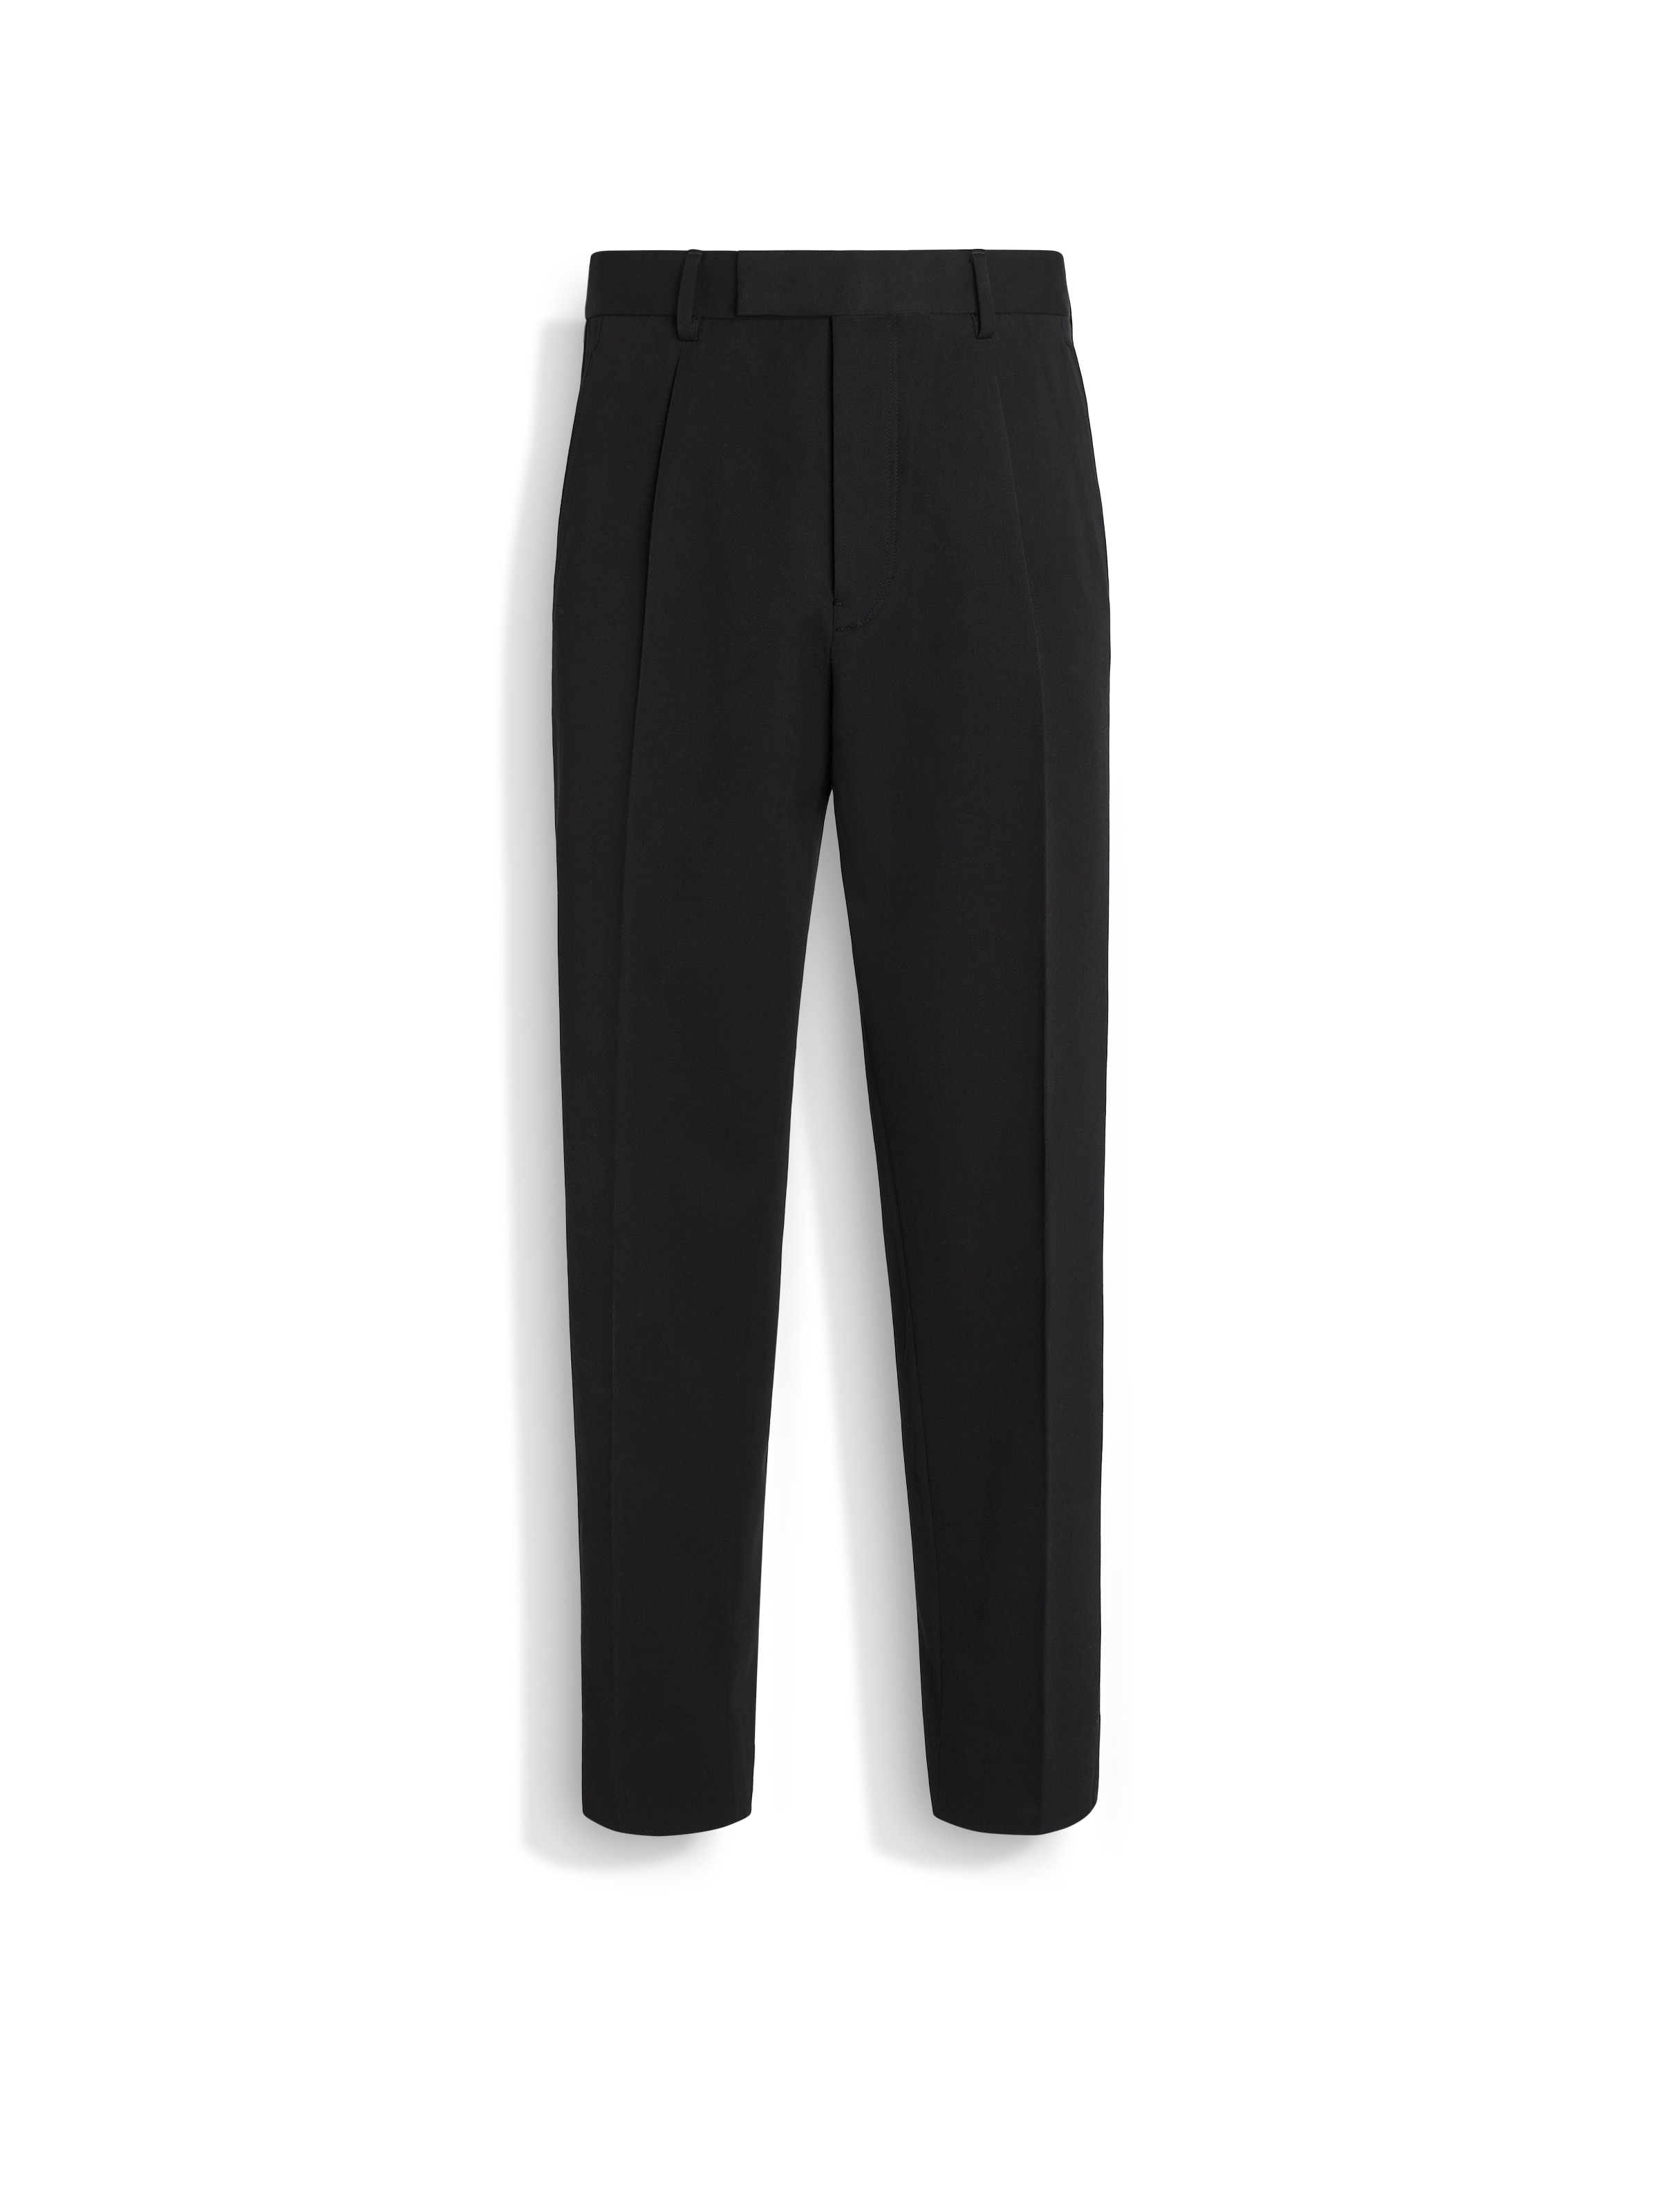 Zegna Black Cotton And Wool Pants